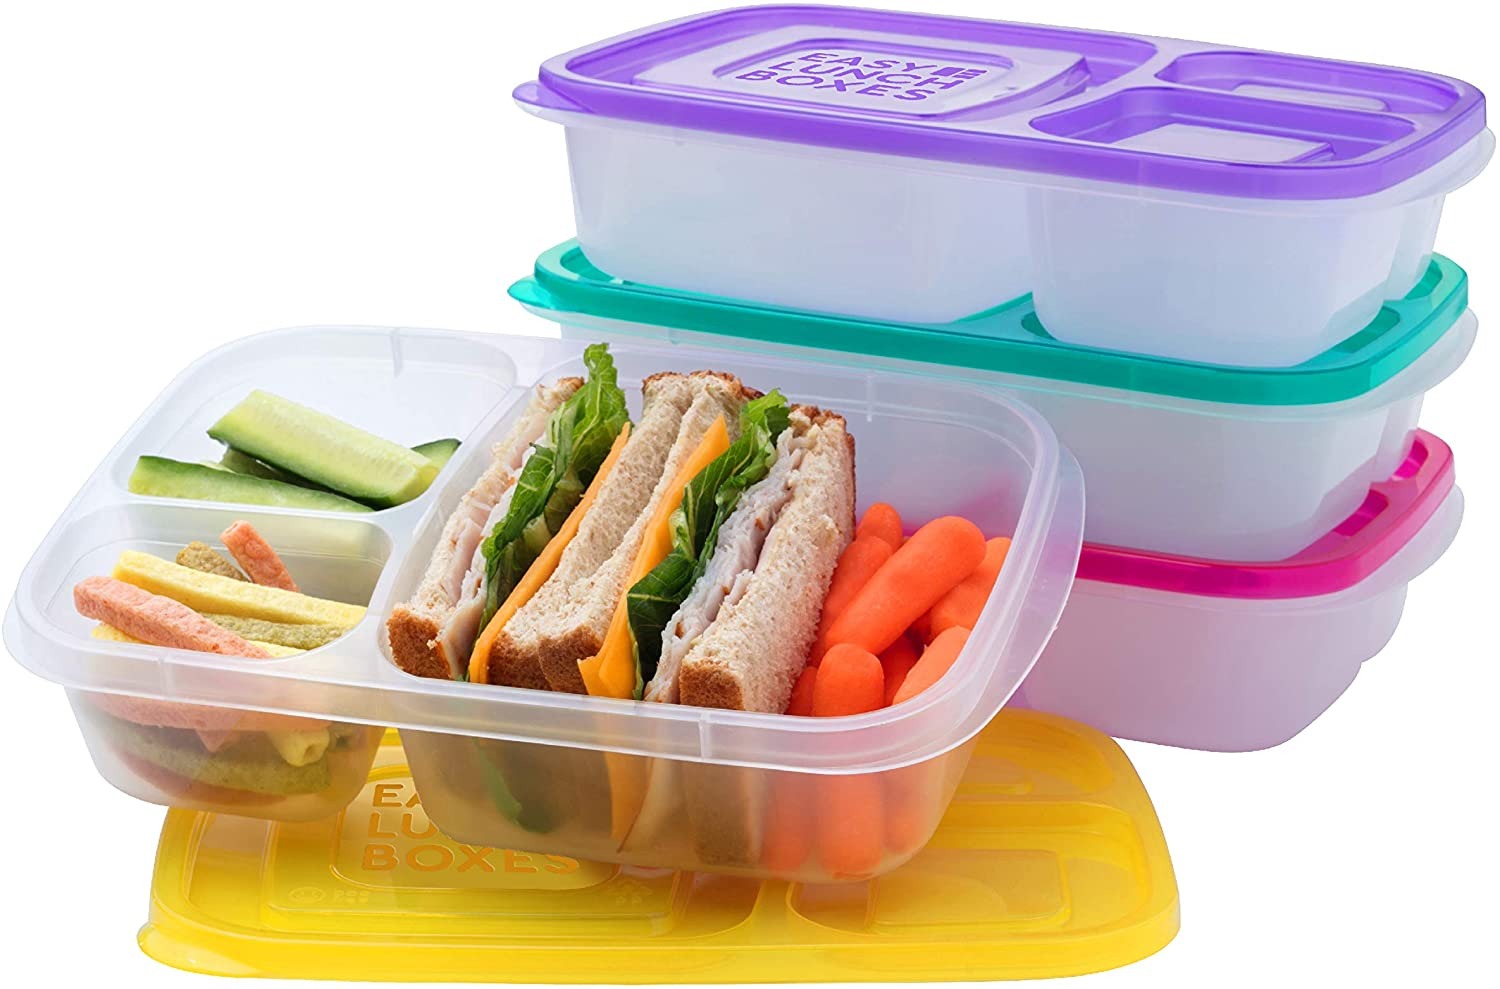 Who Makes The Best Lunch Box